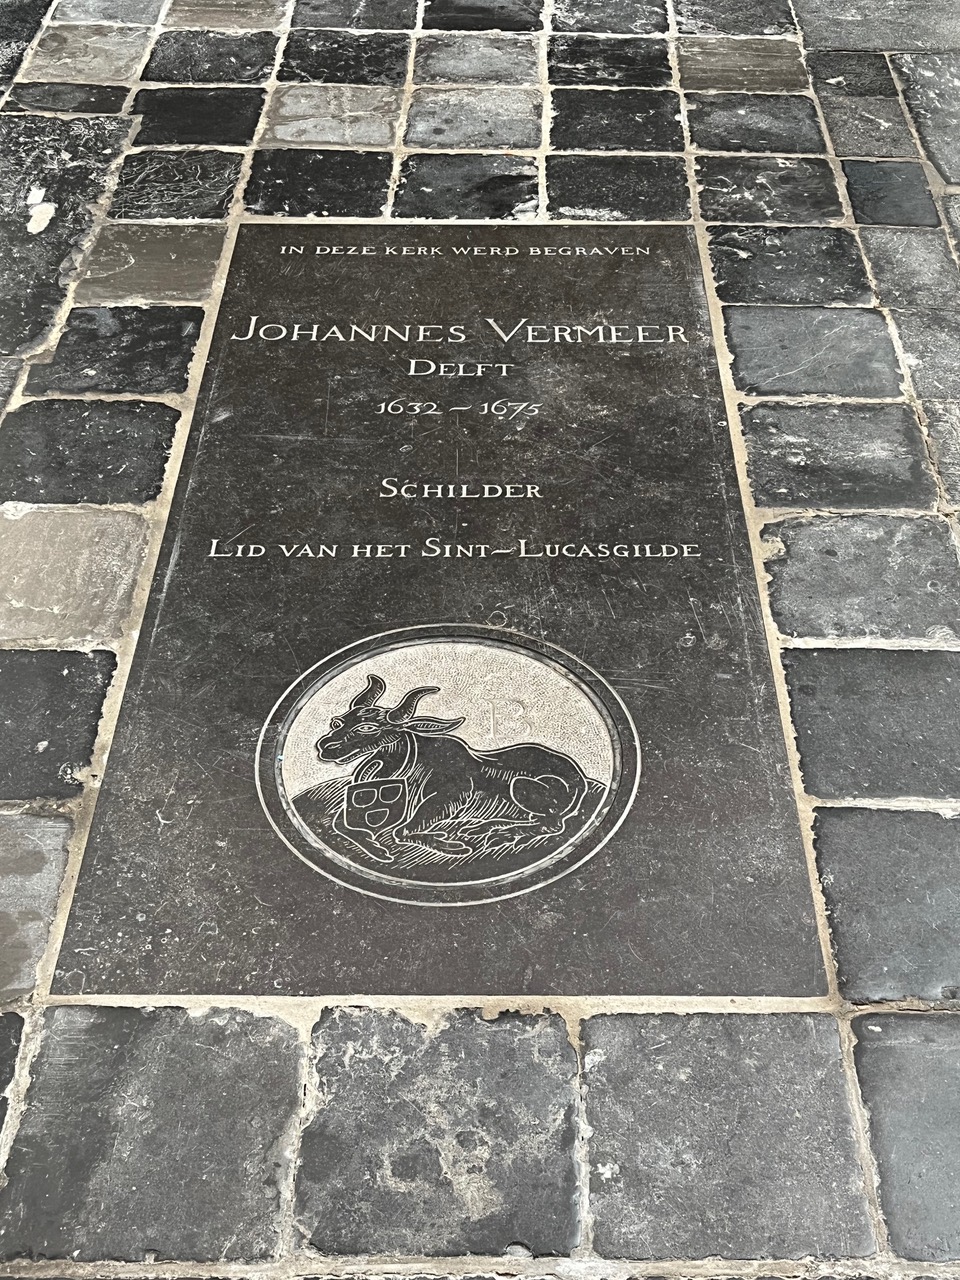 tombstone of Johannes Vermeer in the old church in Delft